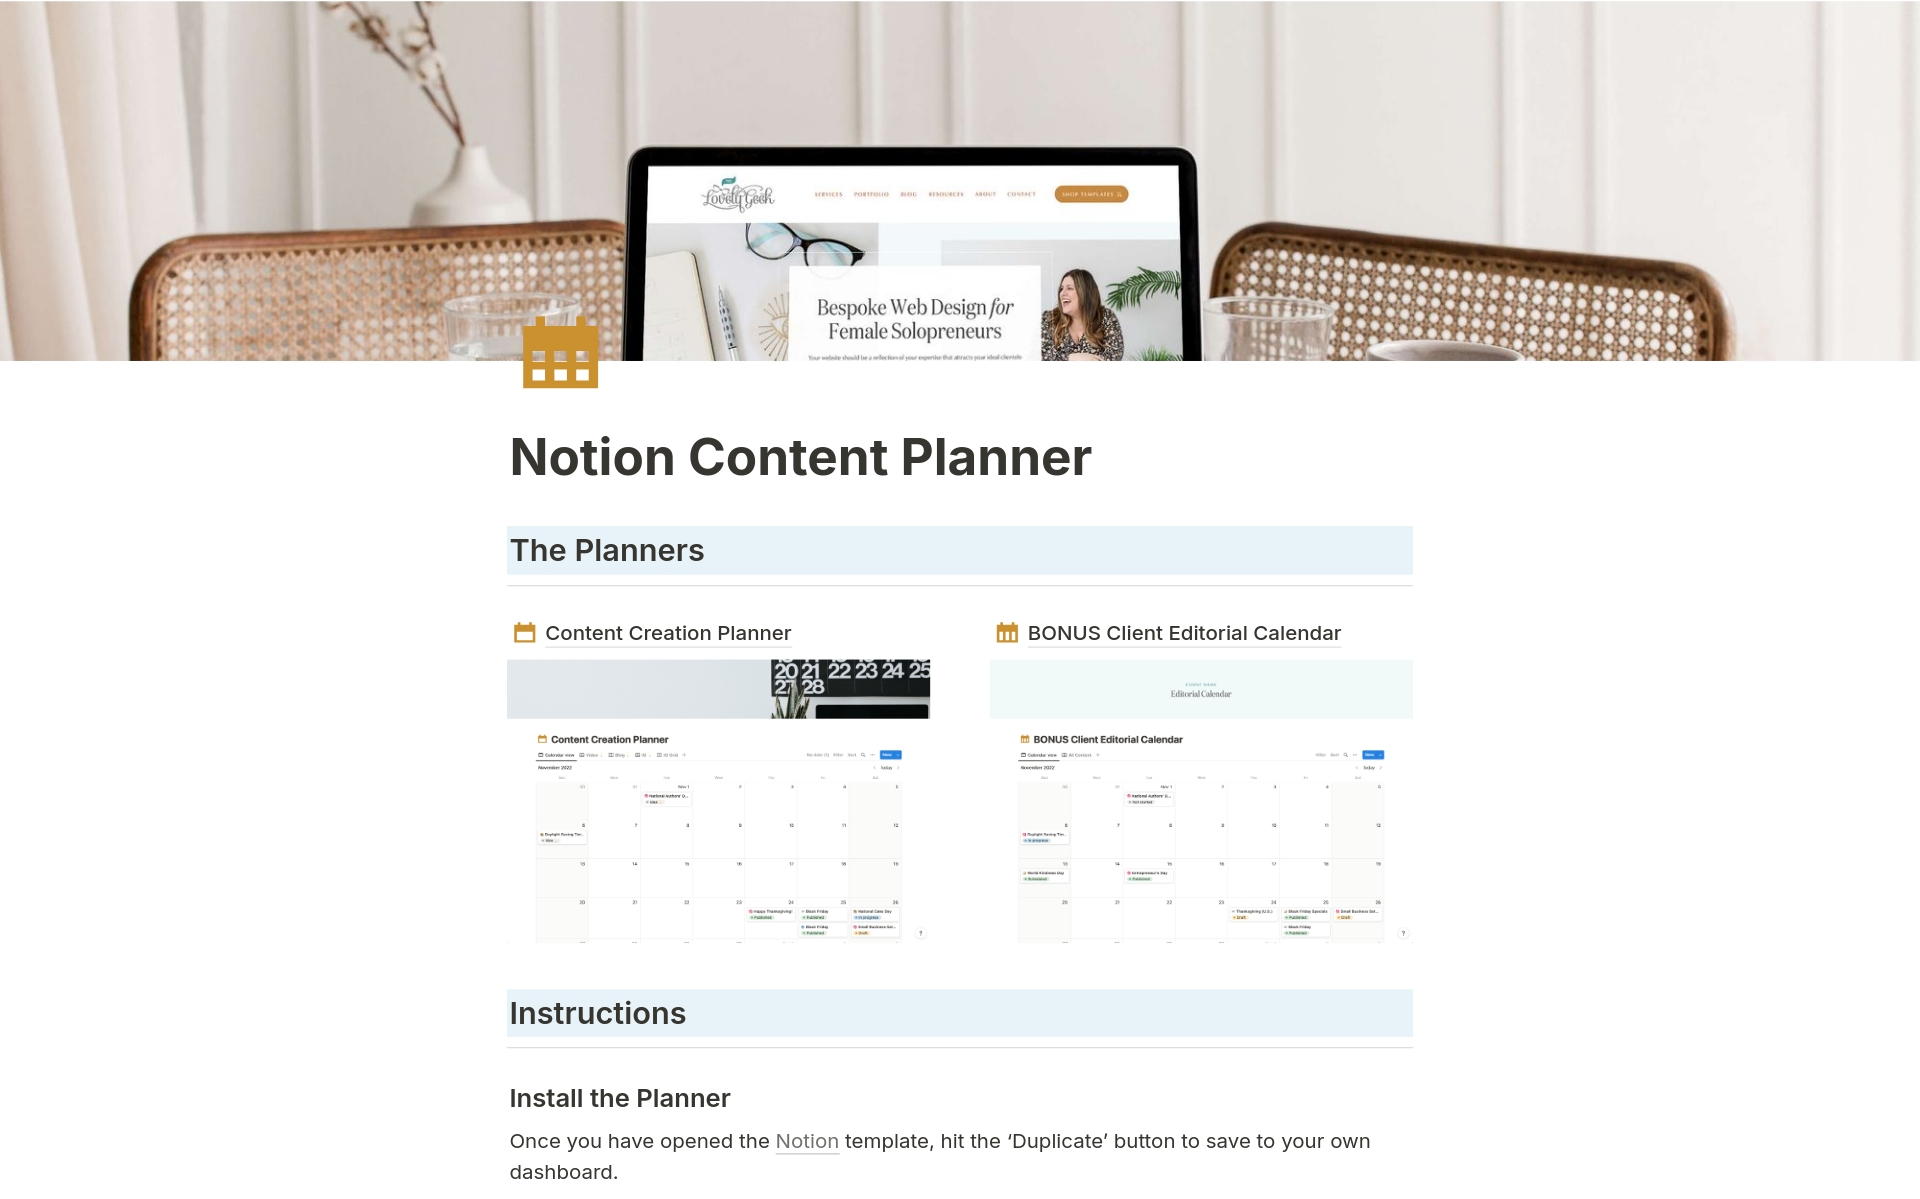 Map out your blog posts and social media content with my Notion Content Planner & Editorial Calendar. Includes templates for blog posts, emails, Instagram, videos, and more. Perfect for social media managers, marketers, and content creators.